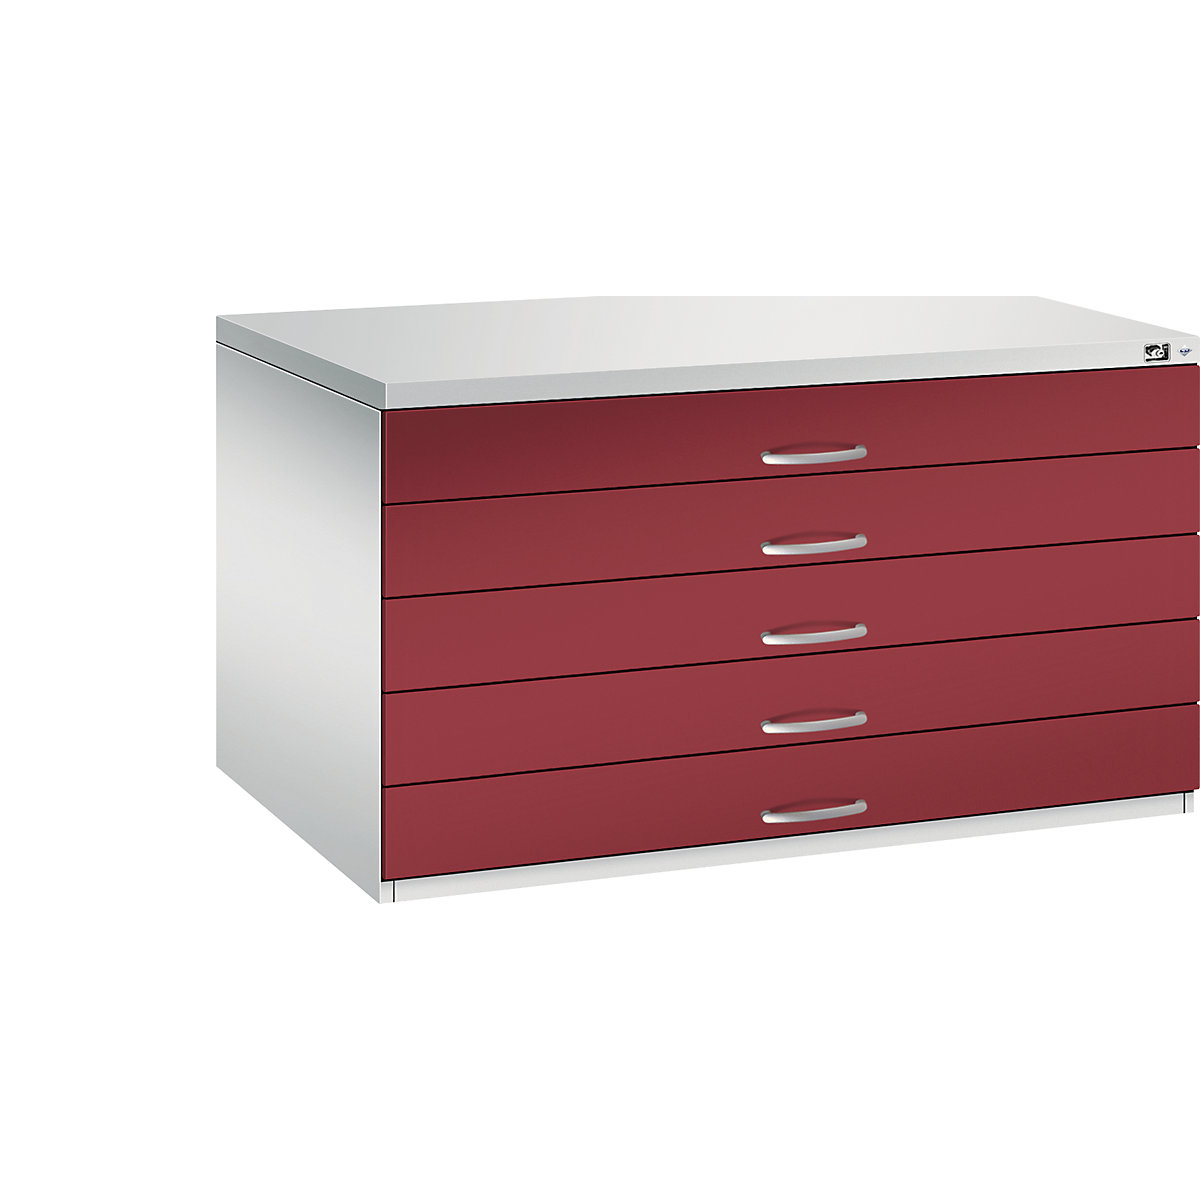 Drawing cabinet – C+P, A0, 5 drawers, height 760 mm, light grey / ruby red-17